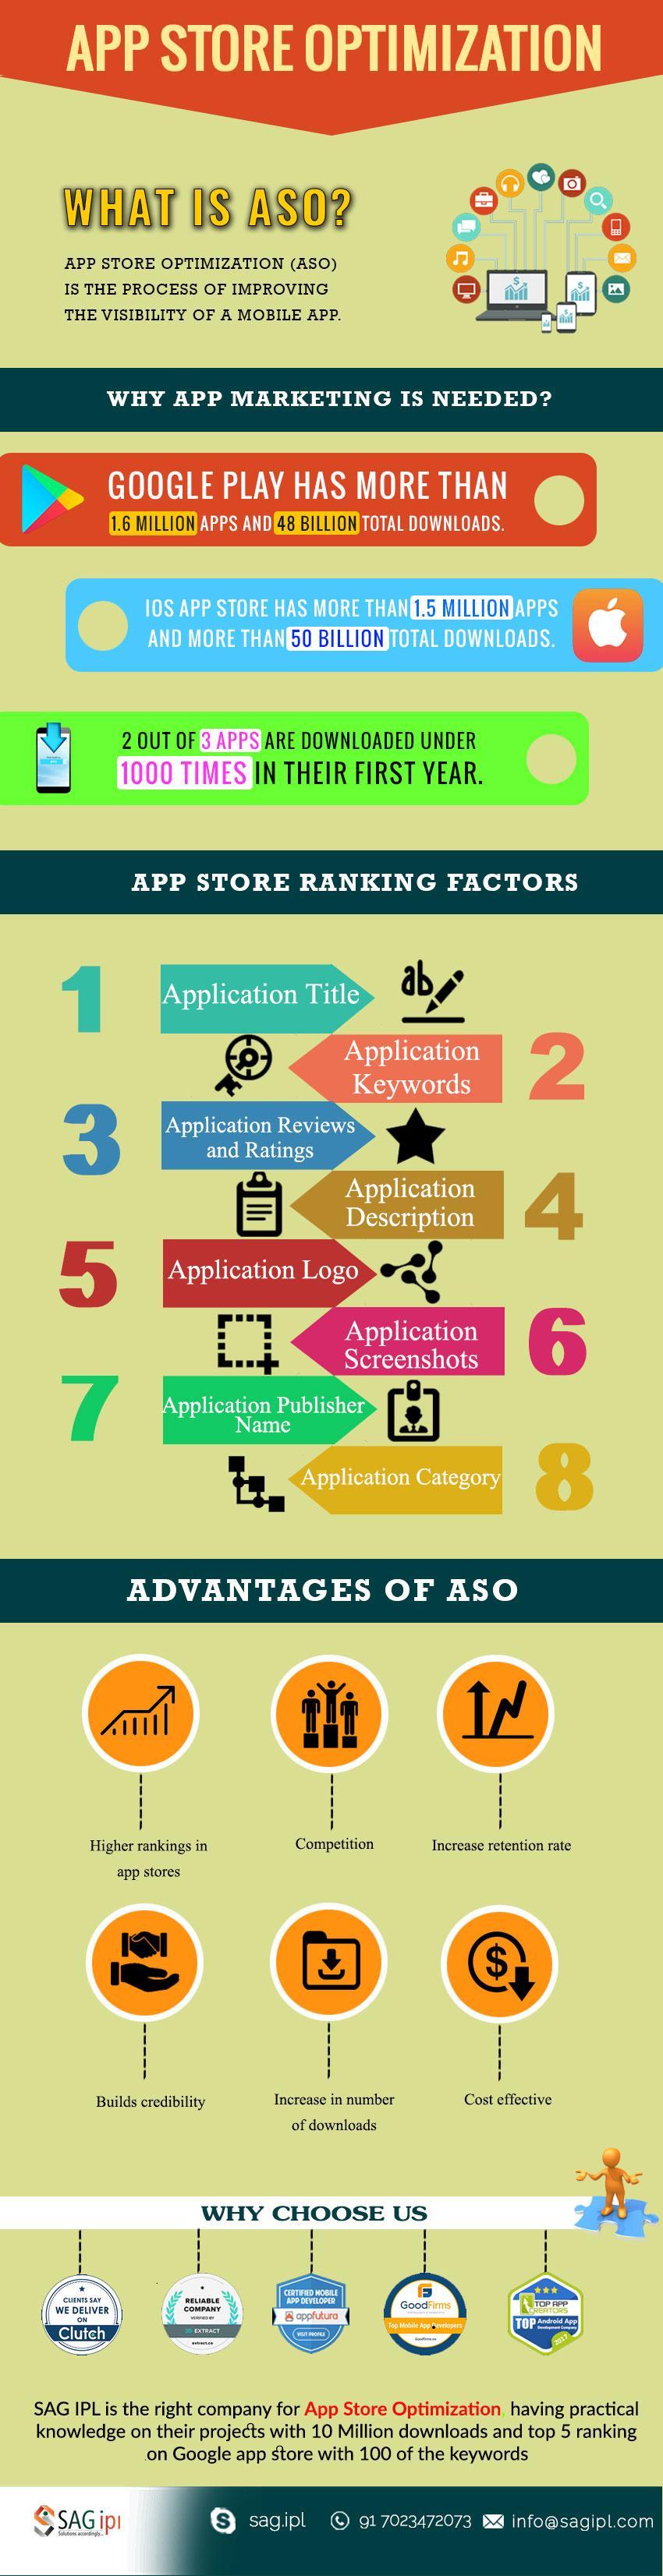 What is App Store Optimization (ASO)?